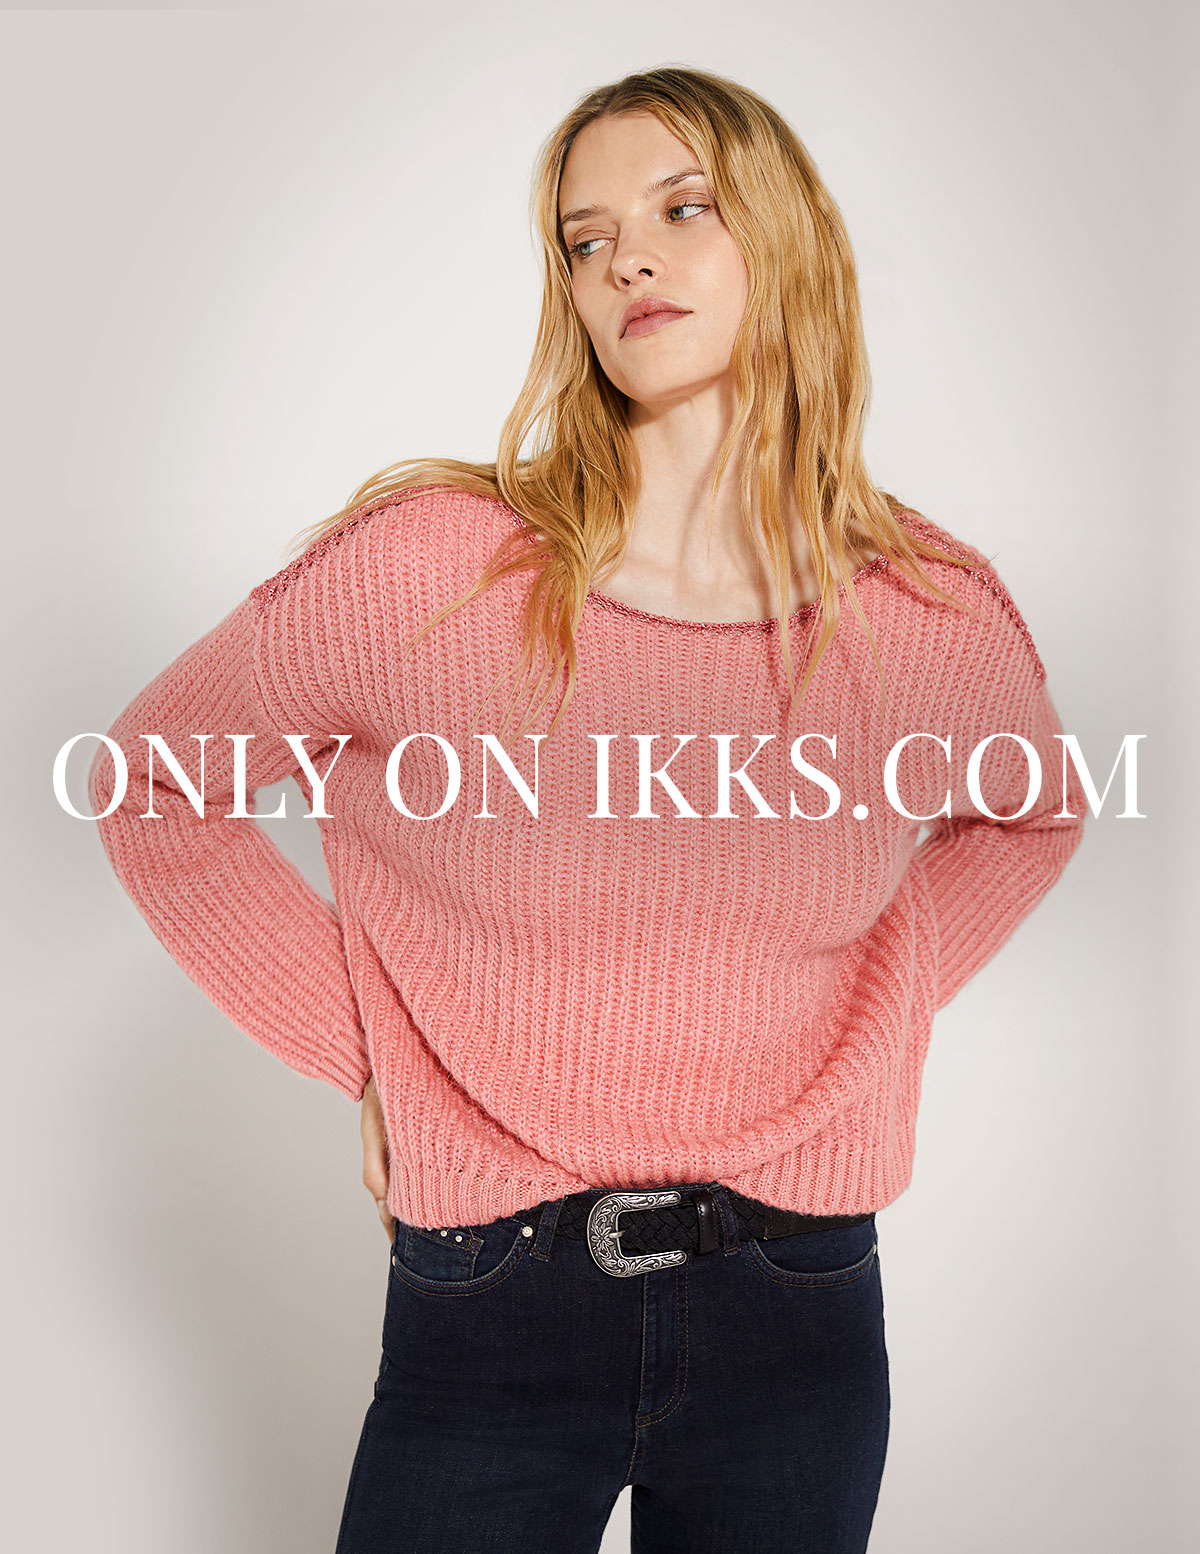 Women’s blush pink chunky knit sweater with mohair